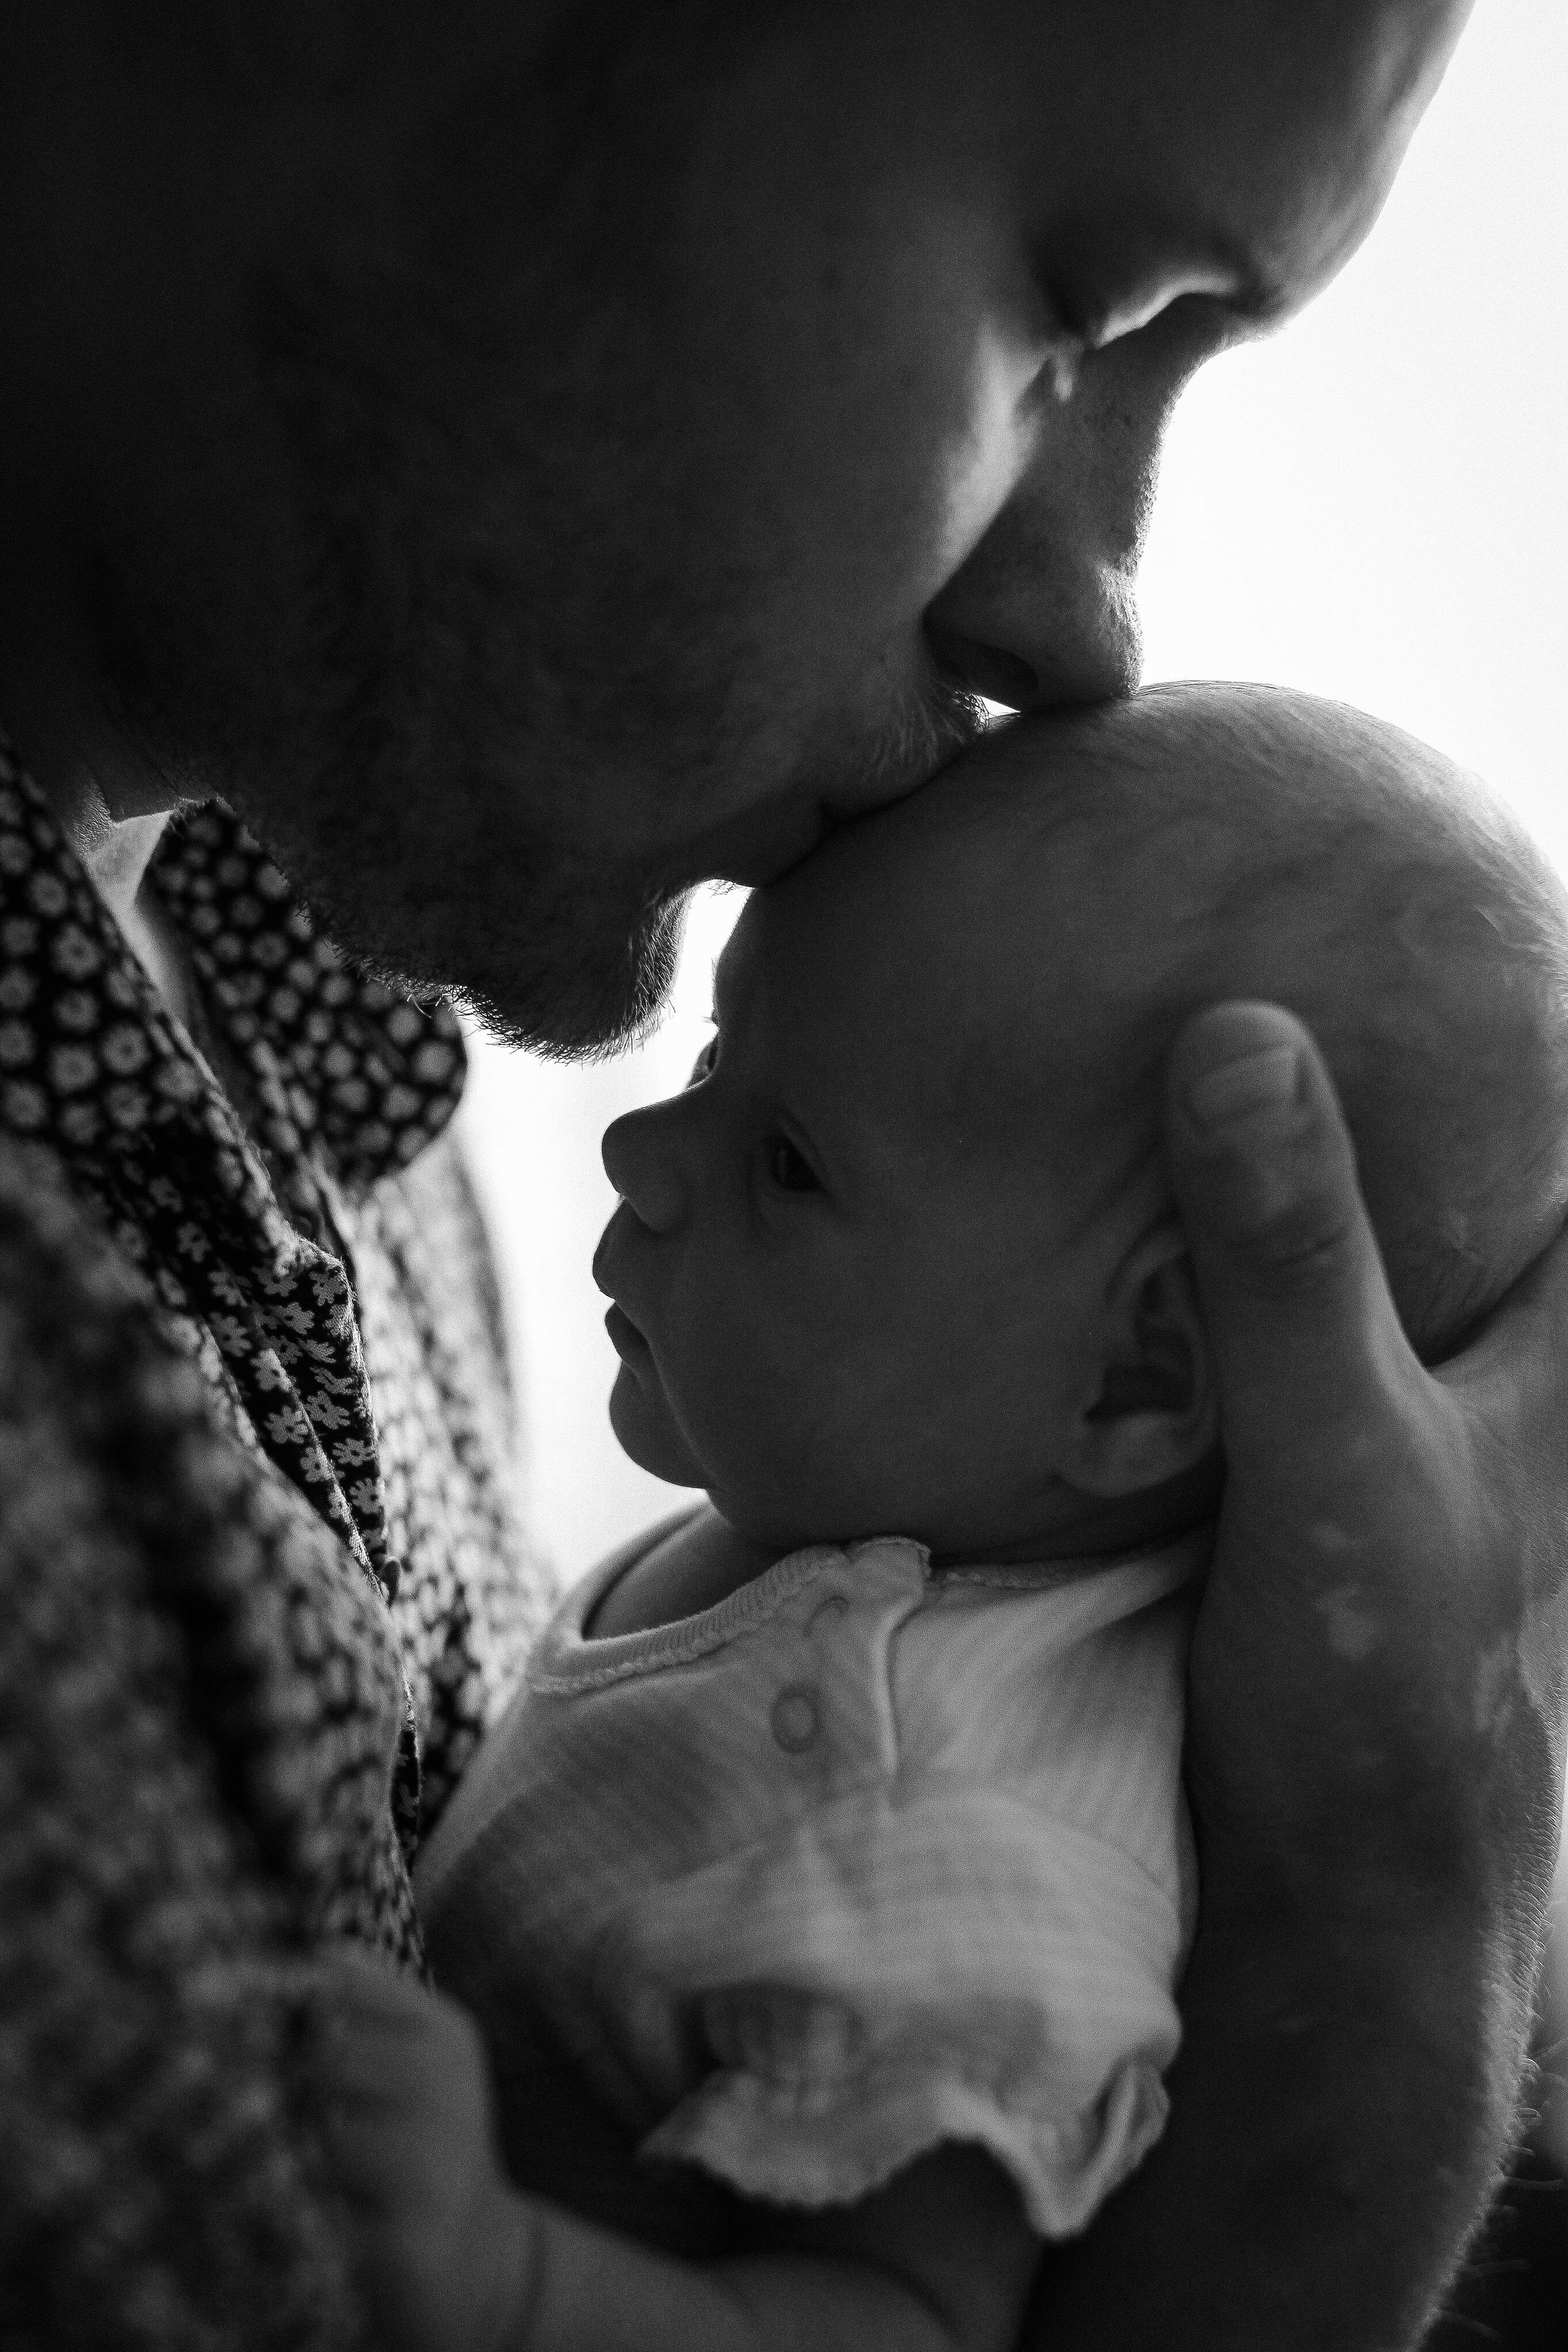 A father kissing his child's forehead | Source: Pexels